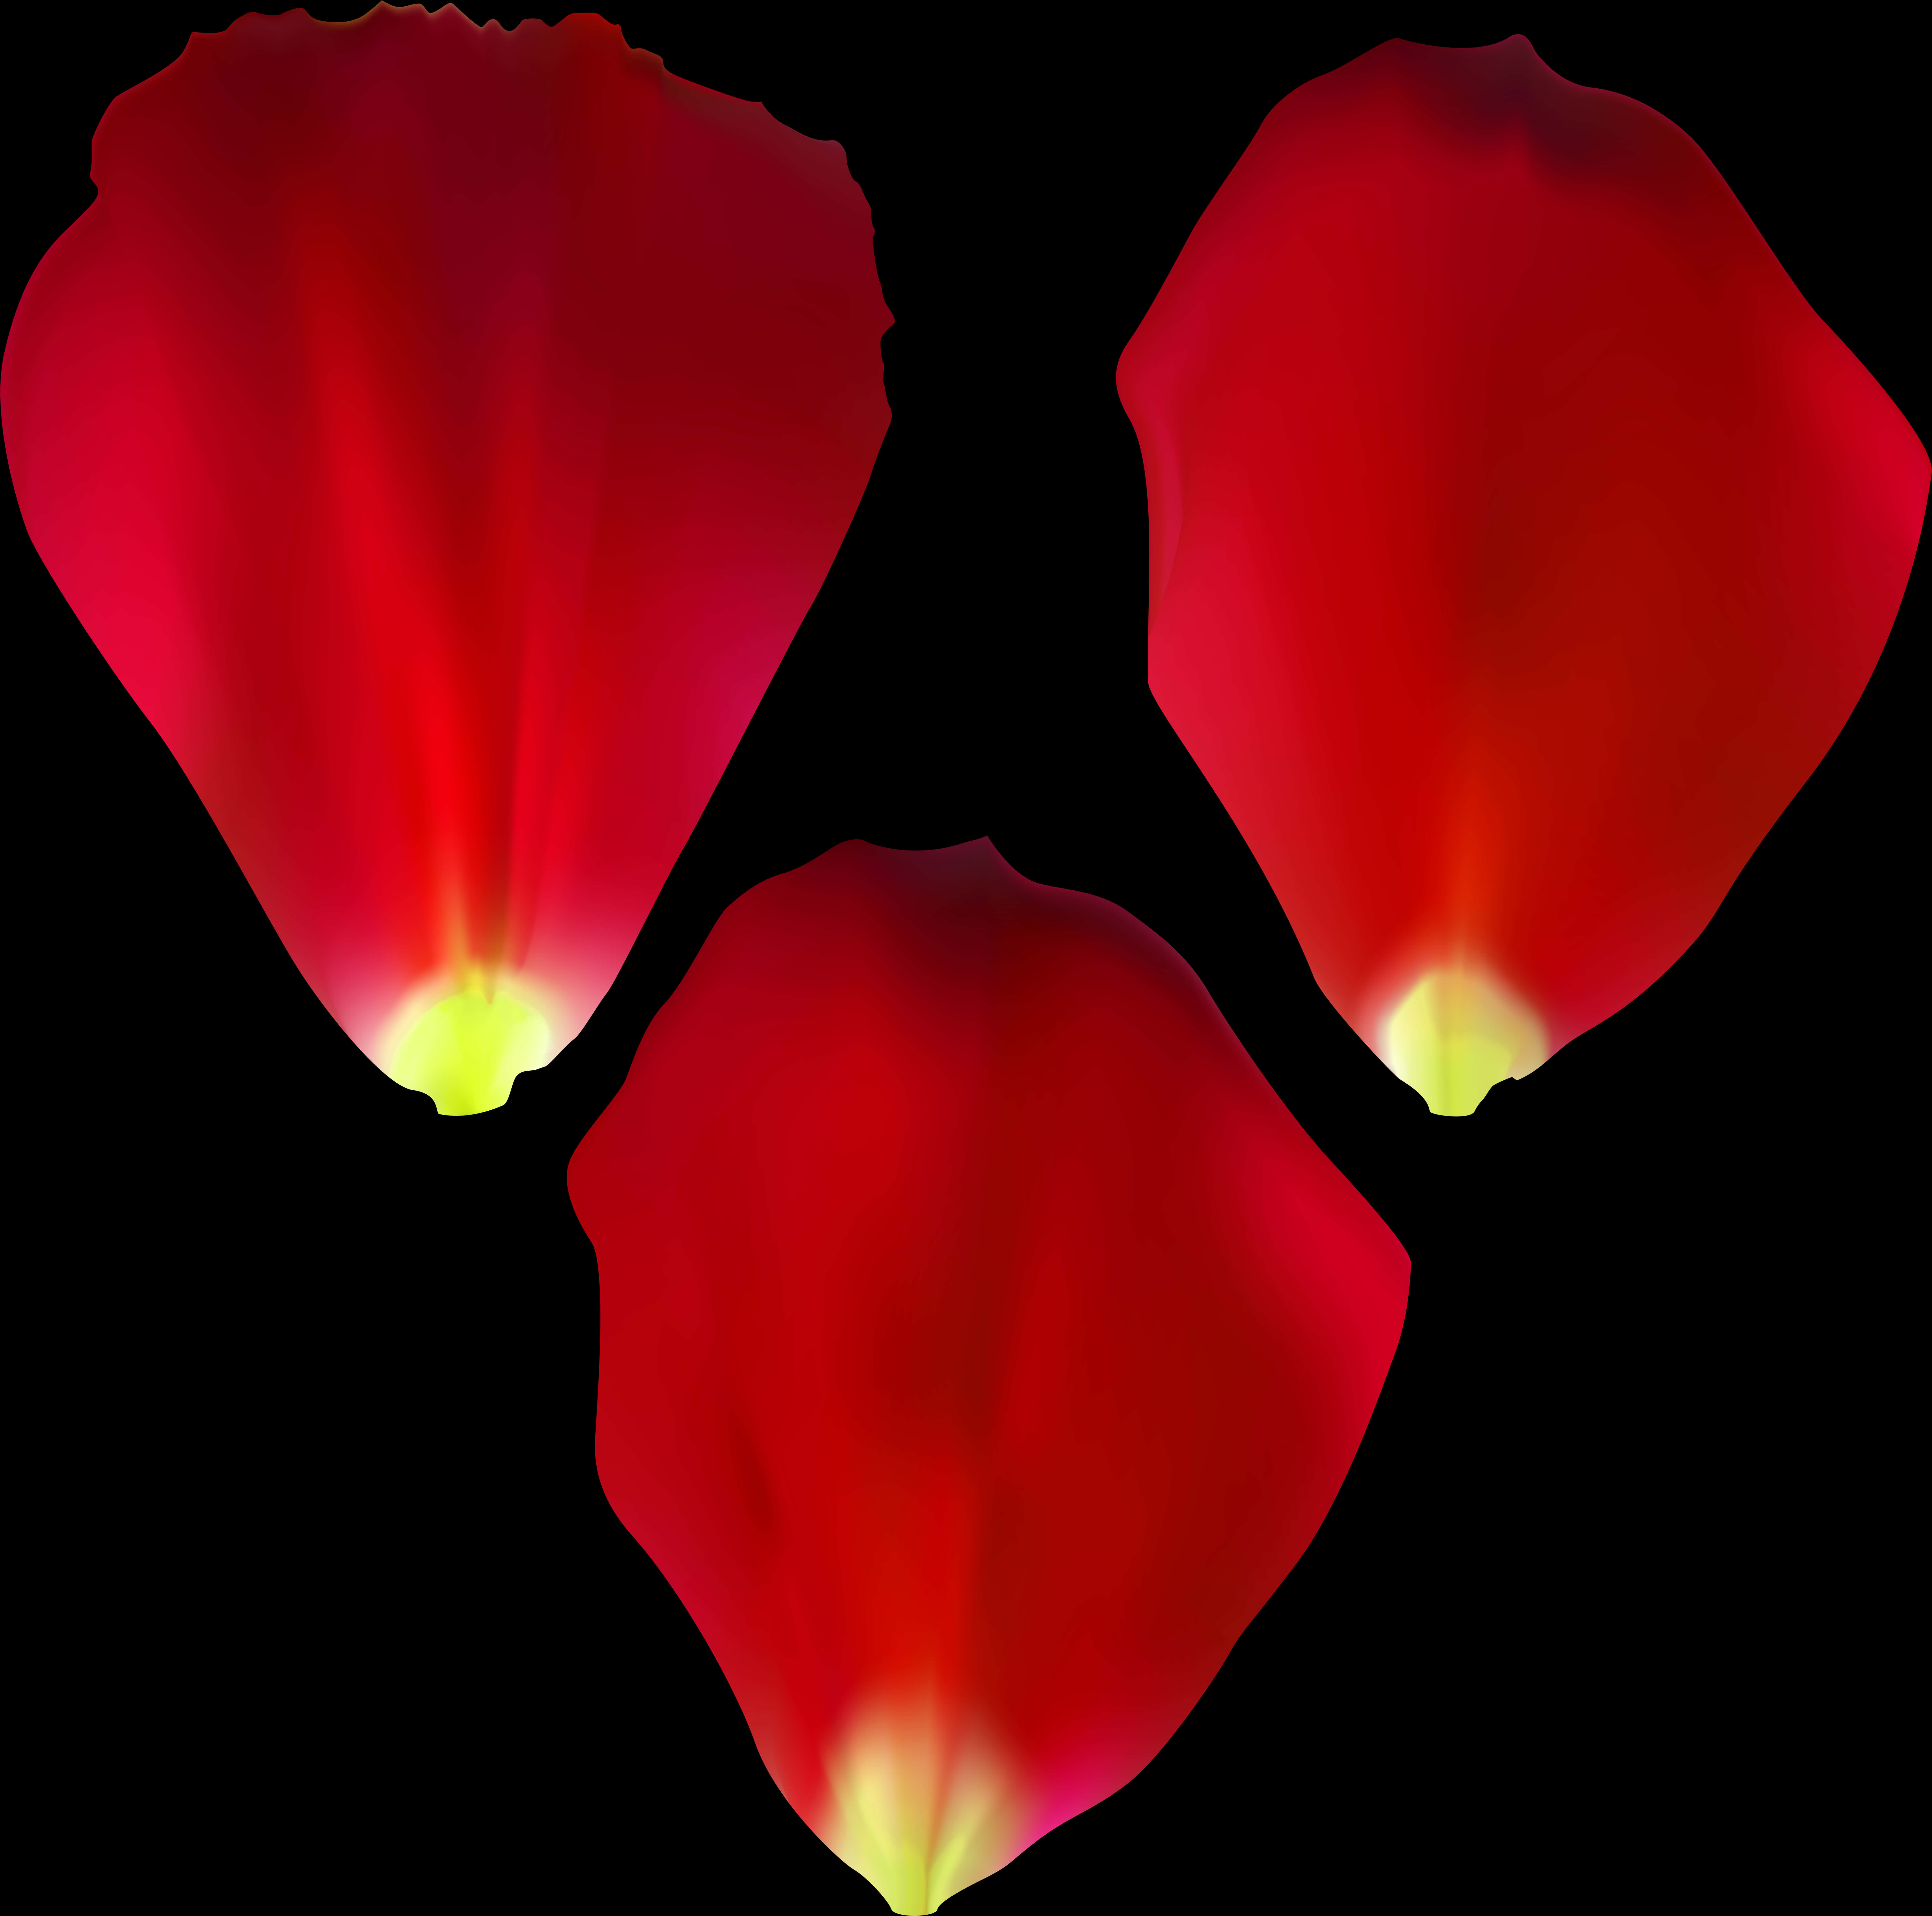 Red Rose Petalson Black Background PNG